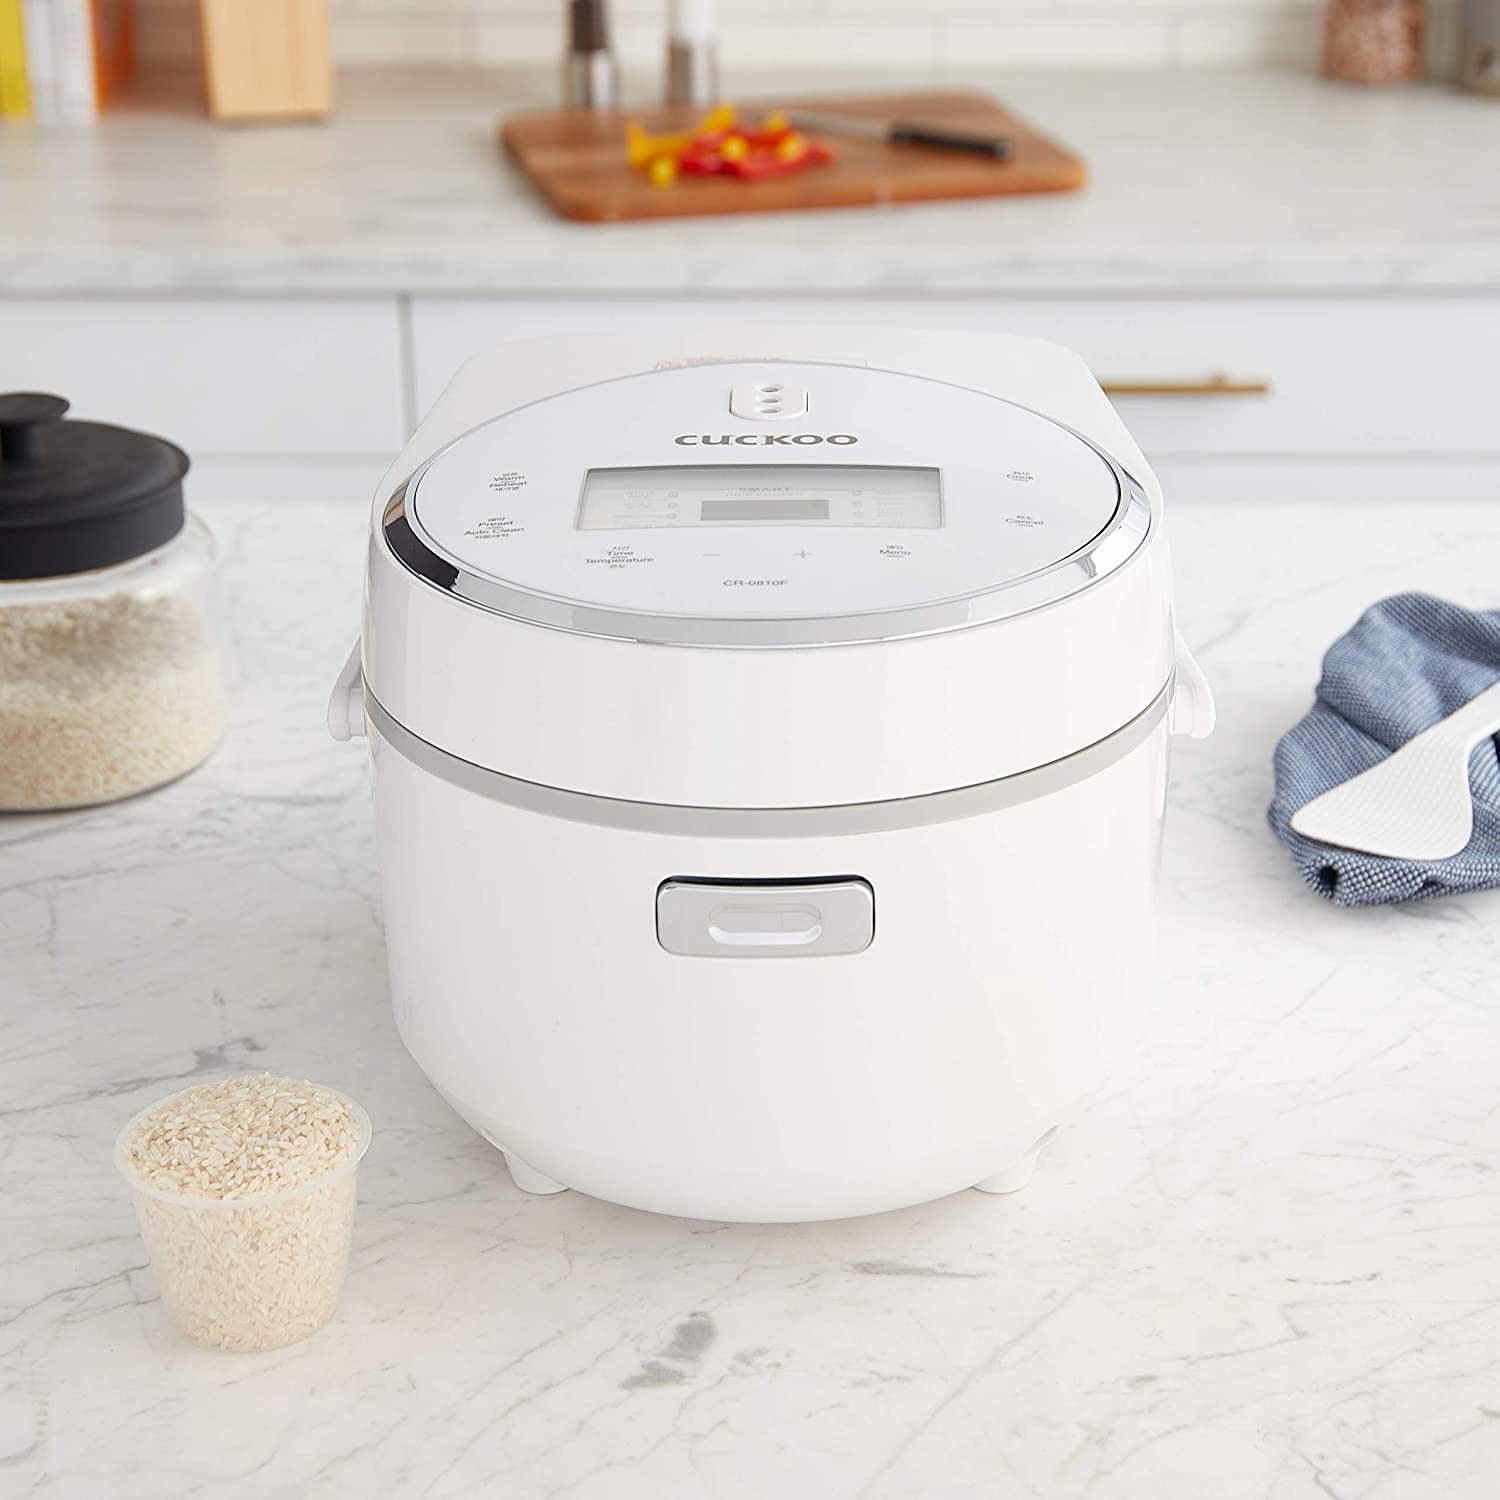 Cuckoo Micom Rice Cooker with 9 Menu Options, 8-Cup (Uncooked)